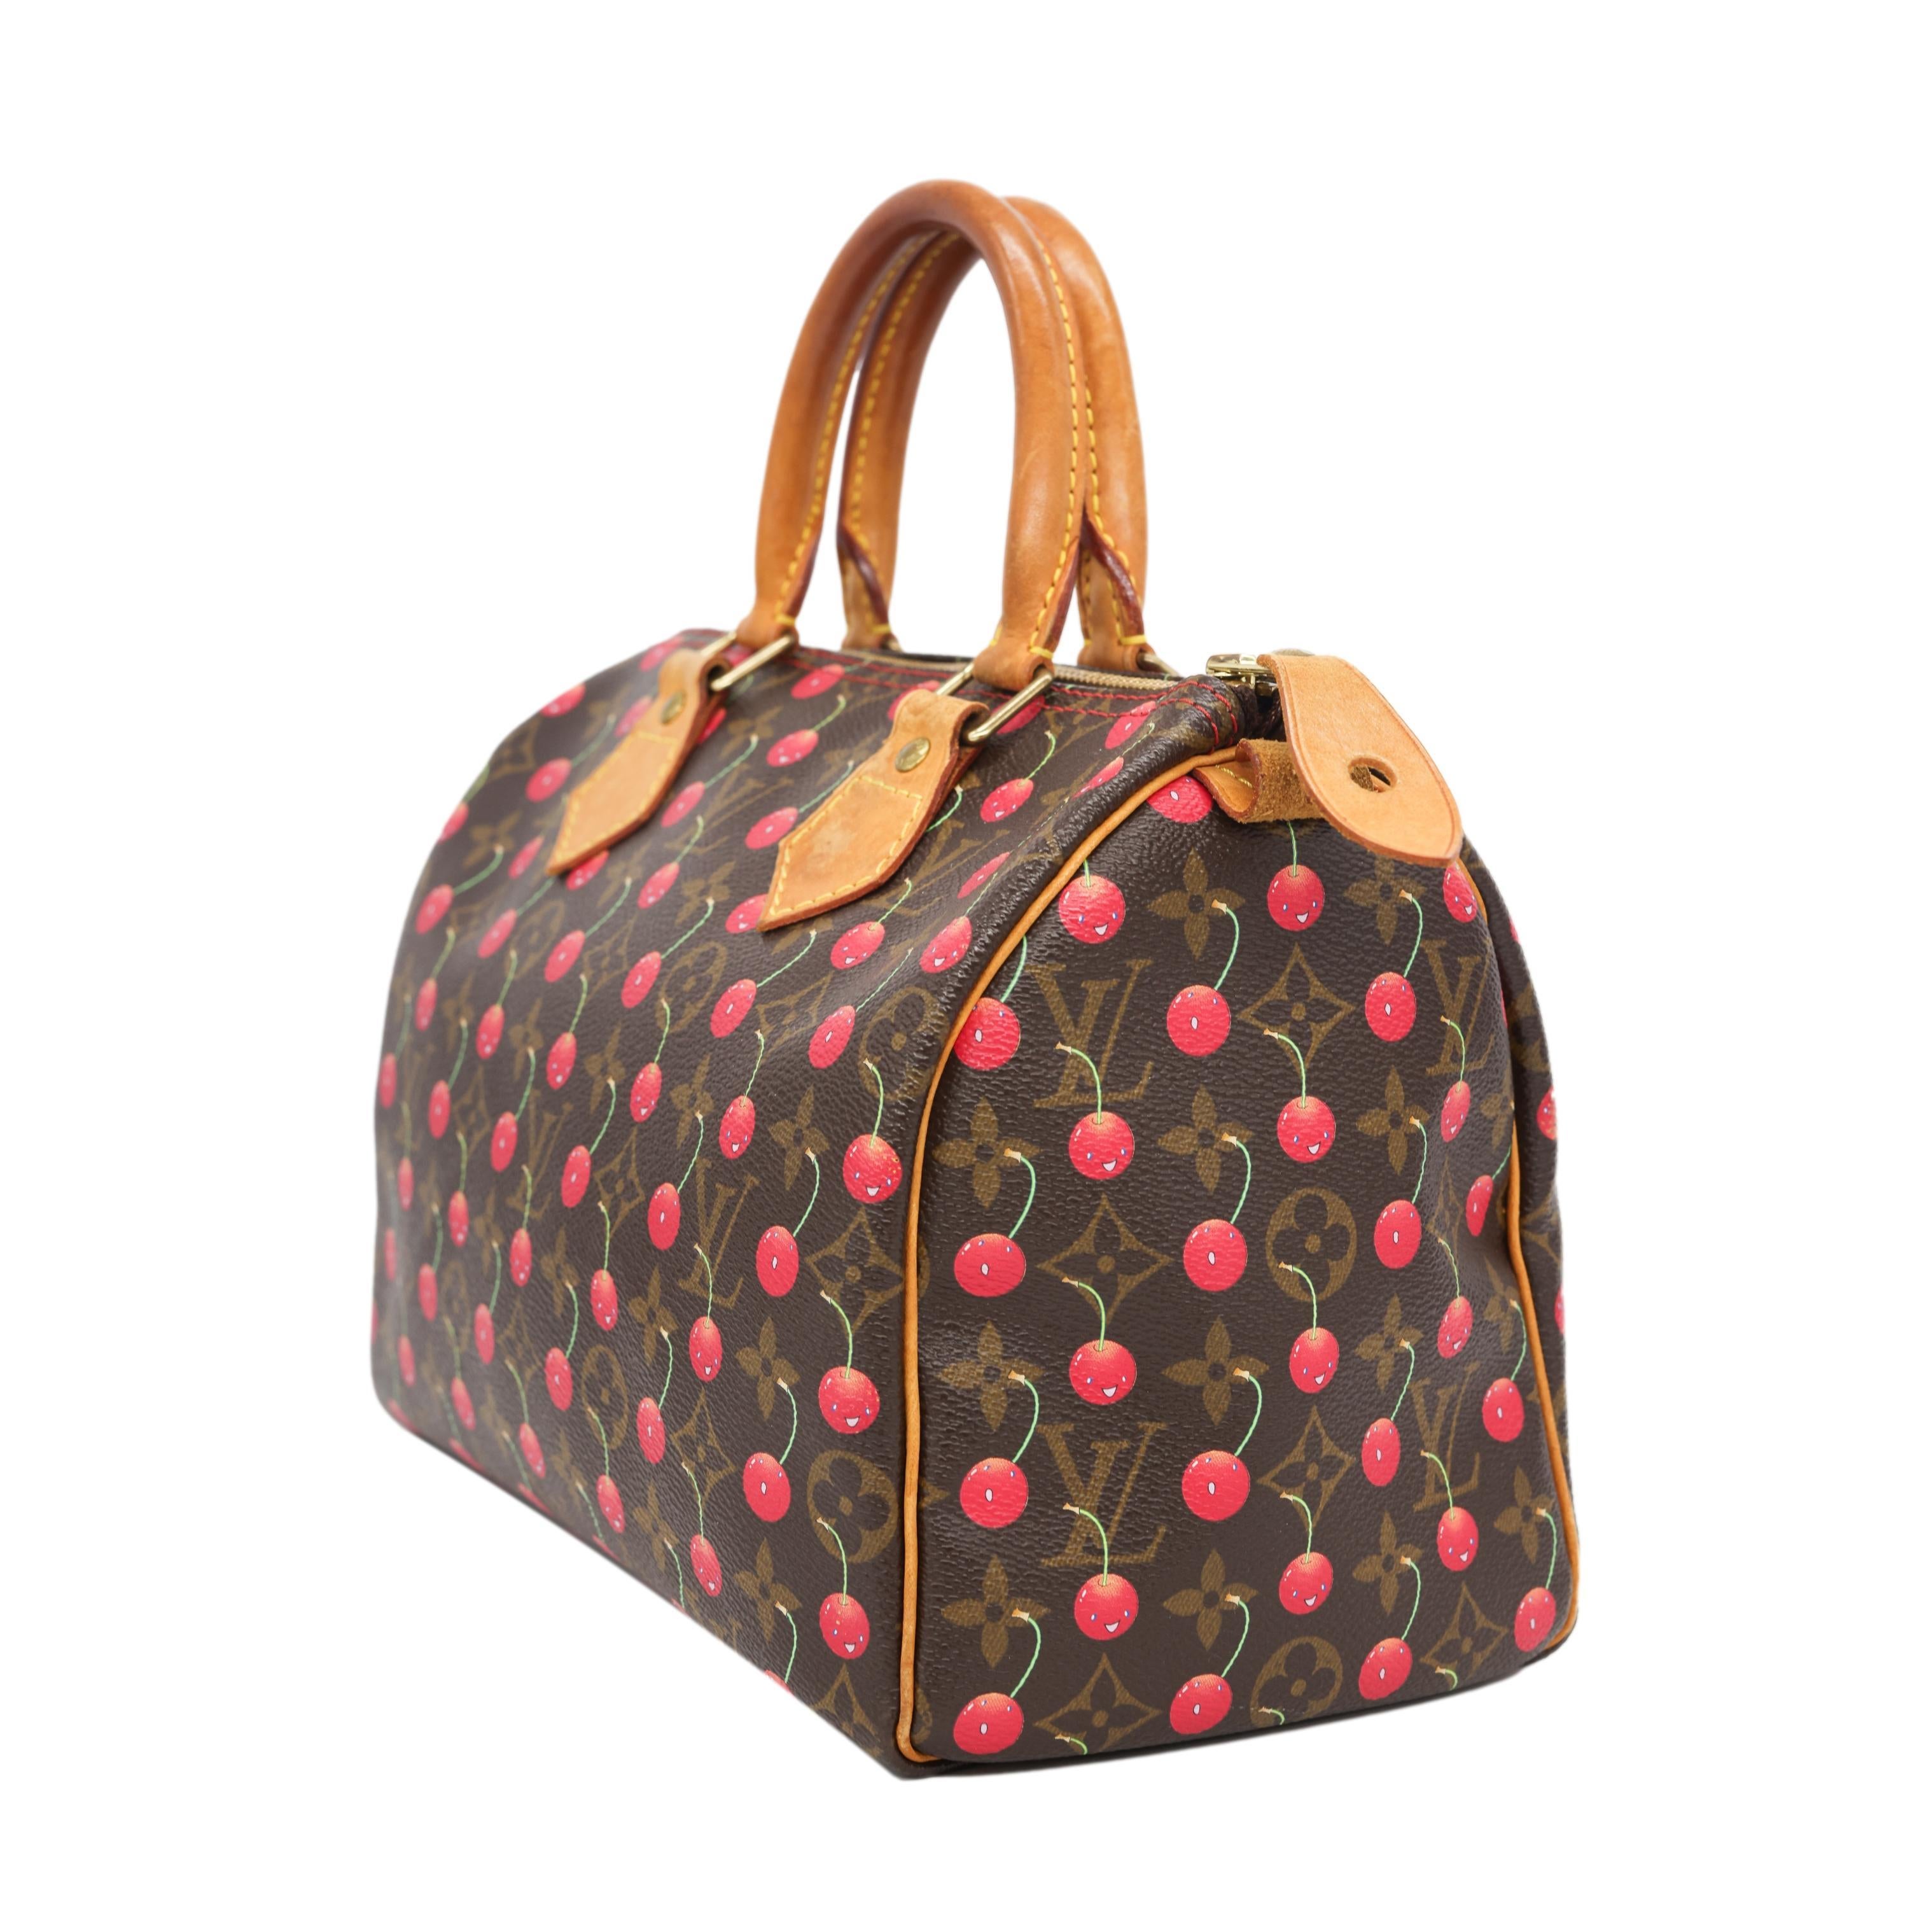 Louis Vuitton Limited Edition Takashi Murakami Cerises Speedy 25 Handbag, 2005. This incredibly rare and highly sought after piece of Louis Vuitton history became a worldwide phenomenon when Japanese artist Takashi Murakami teamed up with the brand